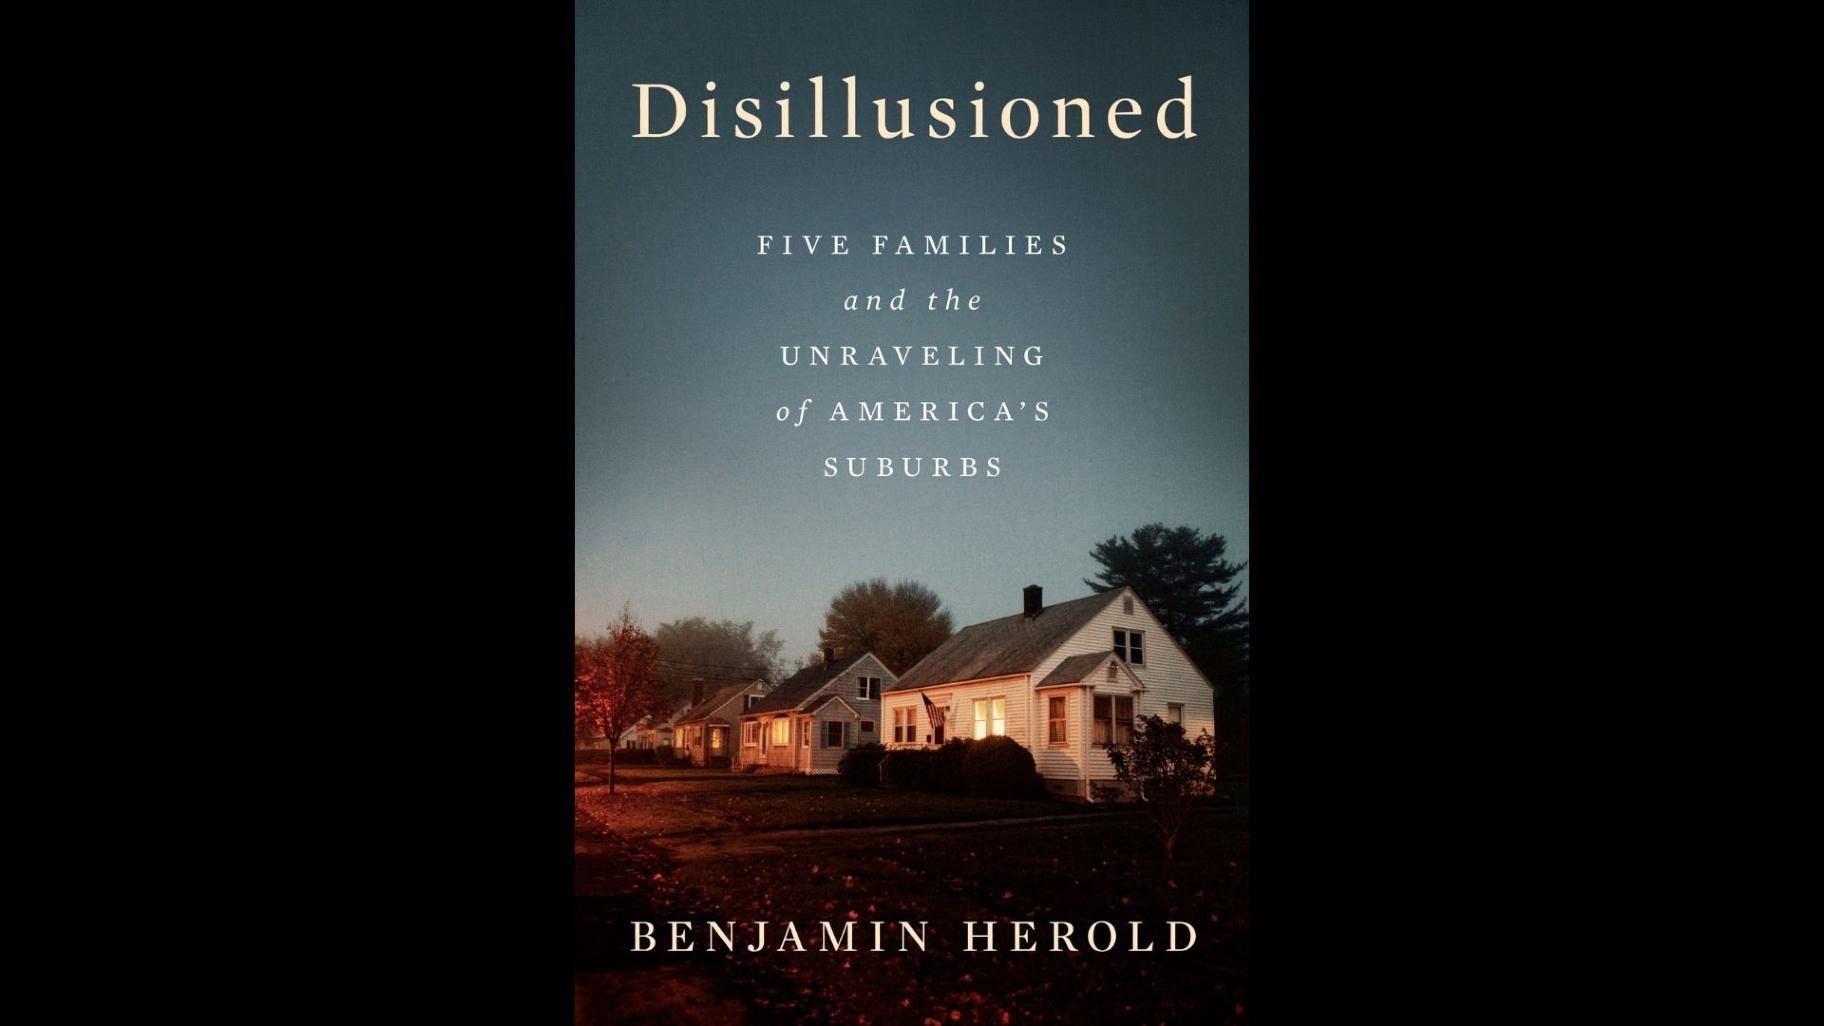 “Disillusioned: Five Families and the Unraveling of America’s Suburbs” by author Benjamin Herold.